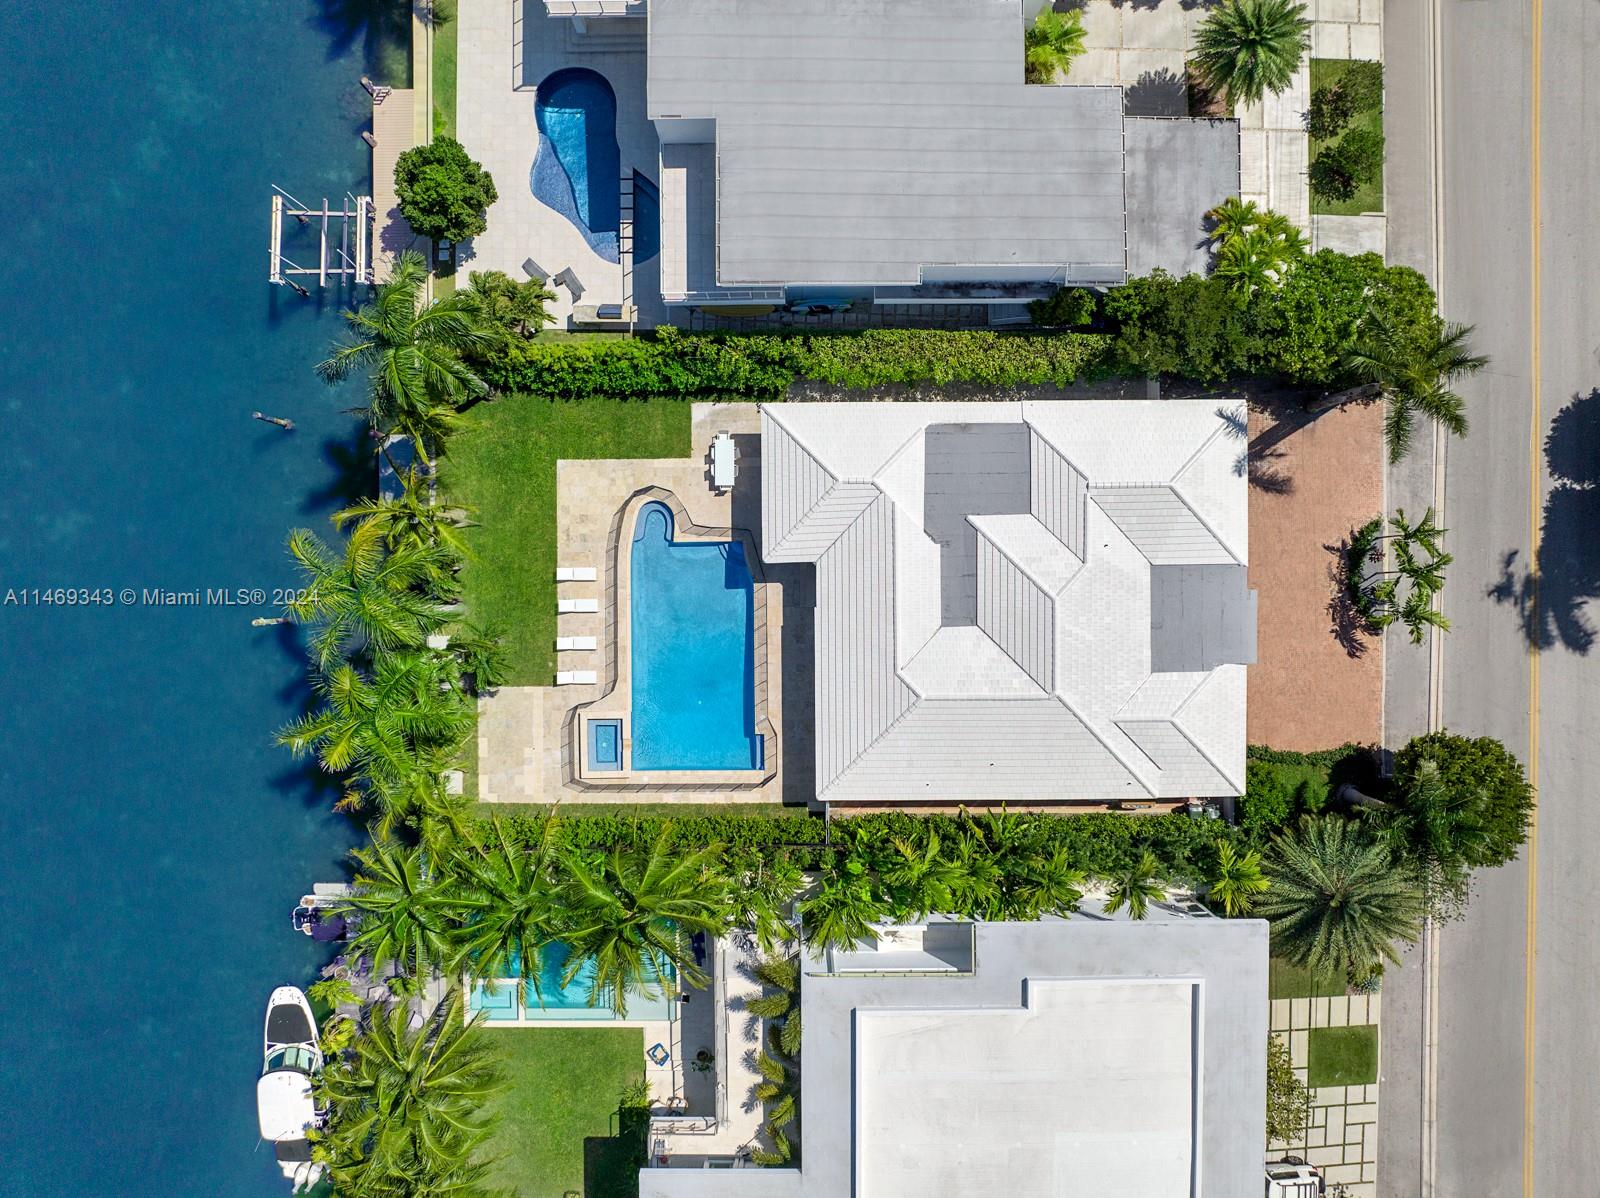 WATERFRONT BAY HARBOR ISLANDS JEWEL, 4 BED/ 4.5 BATH RENOVATED ART DECO HOME, WALKING DISTANCE TO THE WELL, BAL HARBOUR SHOPS, HOUSES OF WORSHIP. 75 FT OF WATERFRONTAGE BEST LOCATION FOR BOATING, KAYAKING AND PADDLE BOARDING.